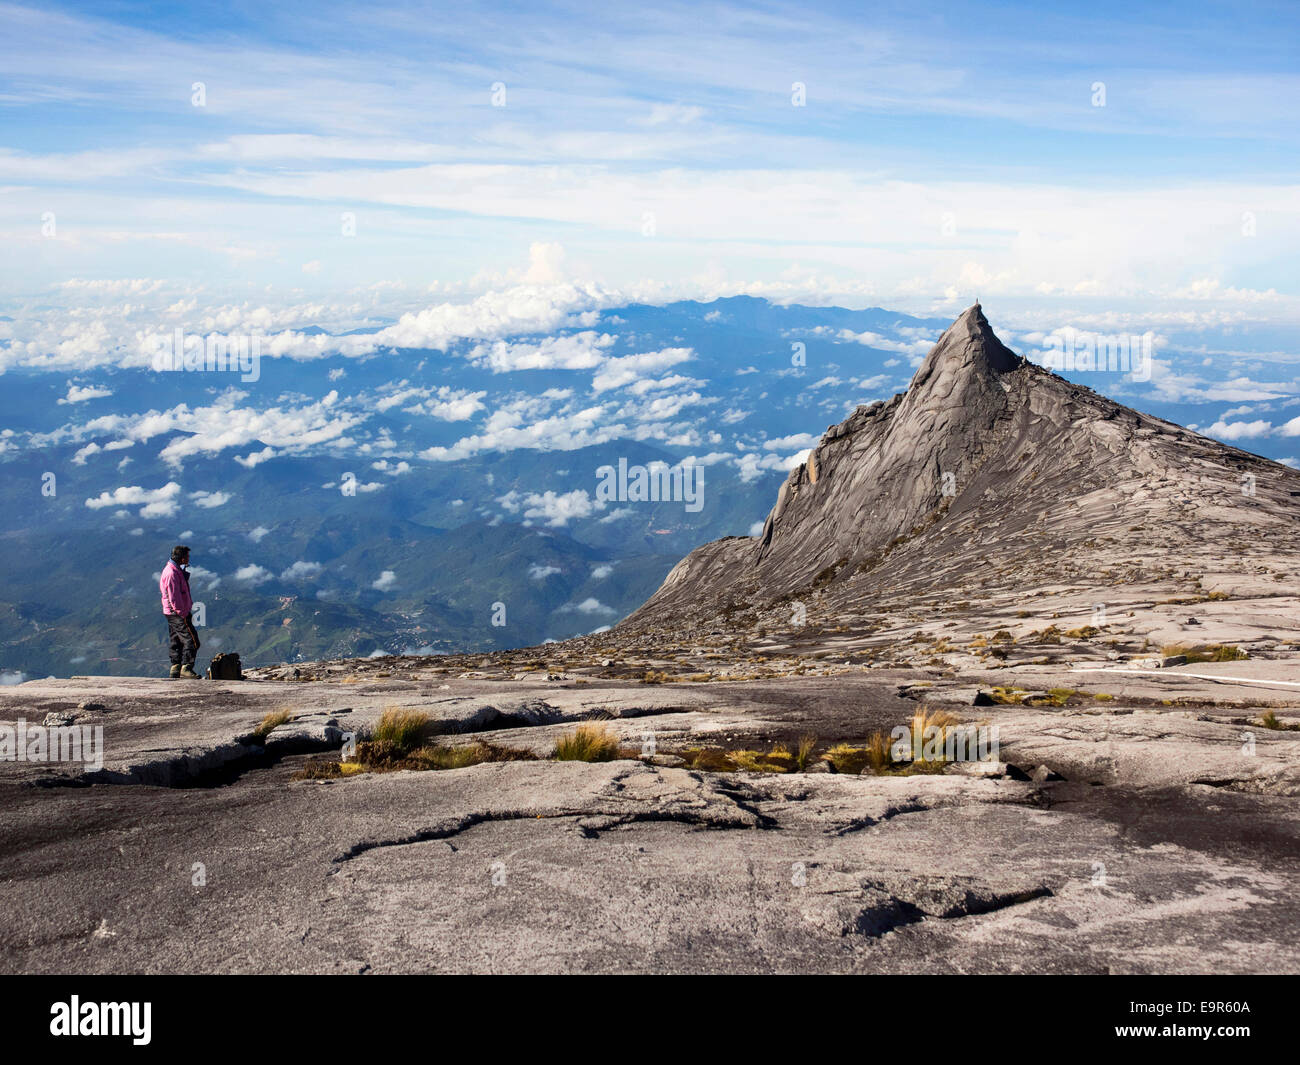 Hiker at the top of Mount Kinabalu, the highest peak in the Malay Archipelago, Sabah, East Malaysia. Stock Photo